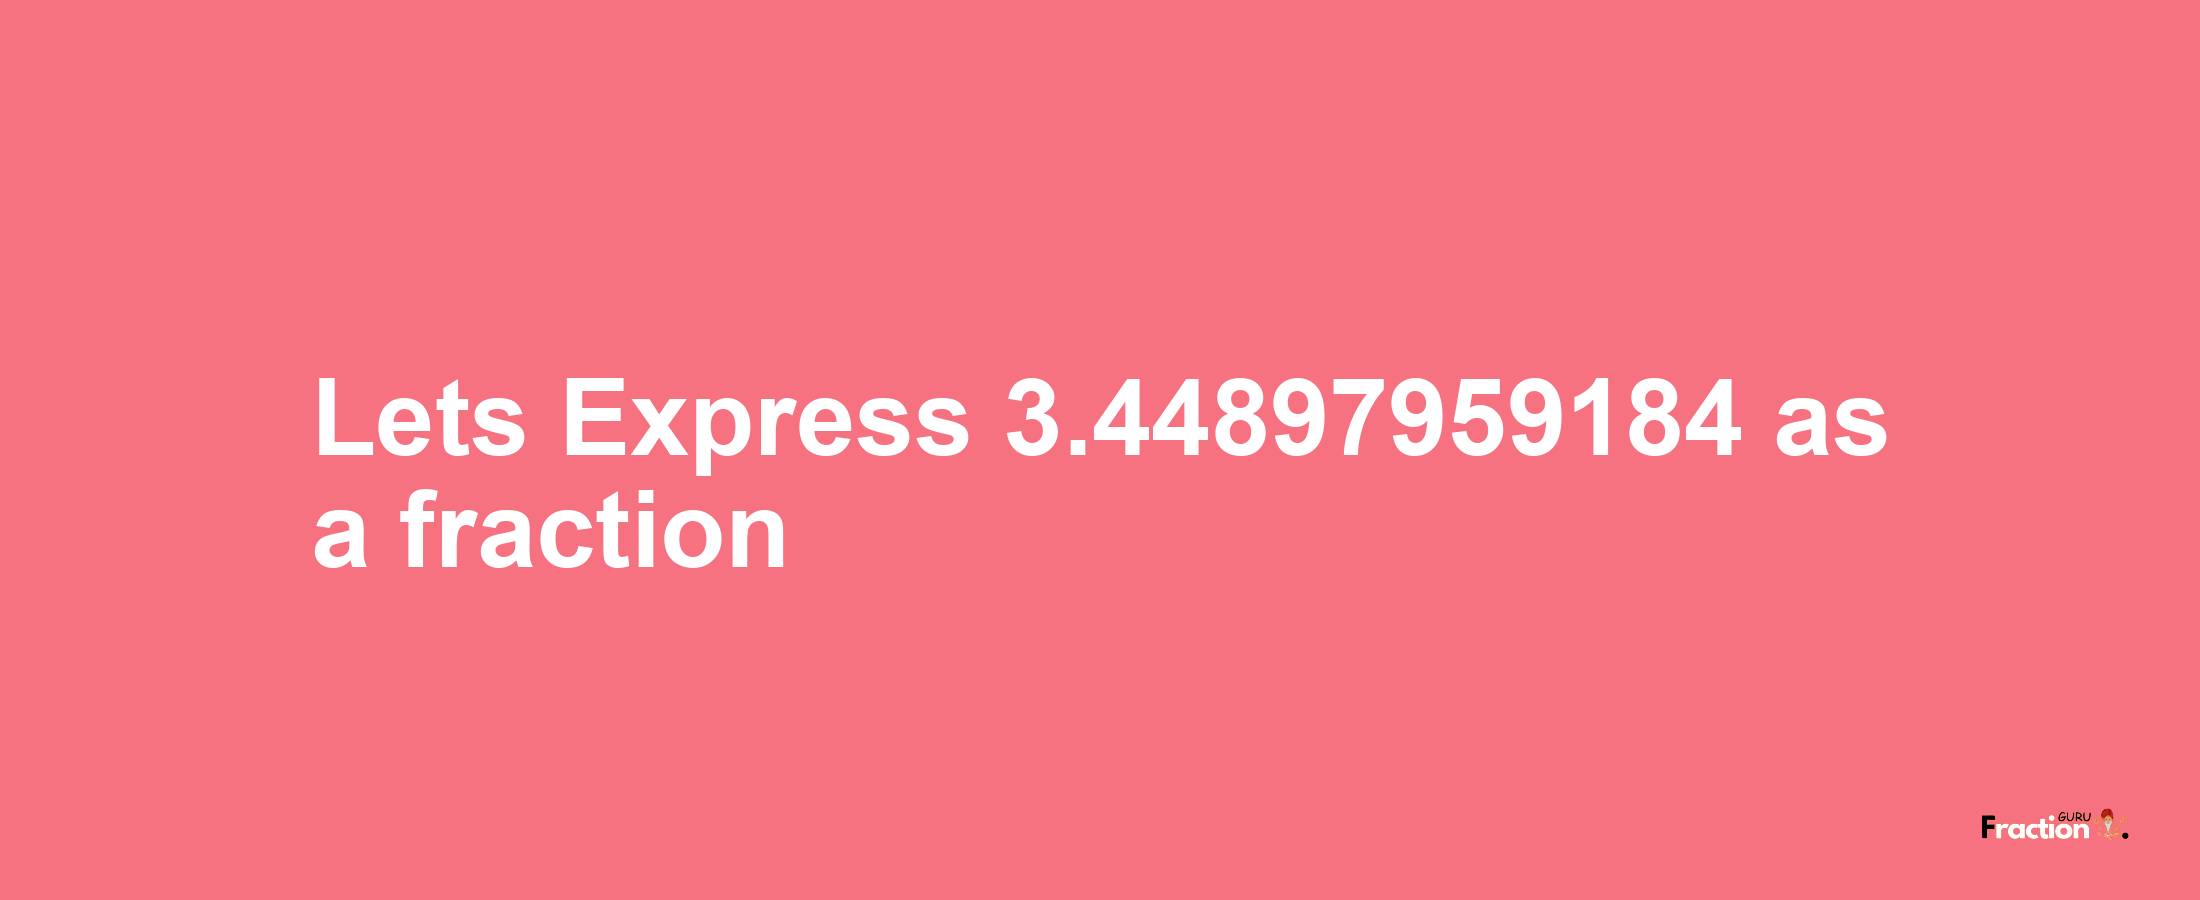 Lets Express 3.44897959184 as afraction